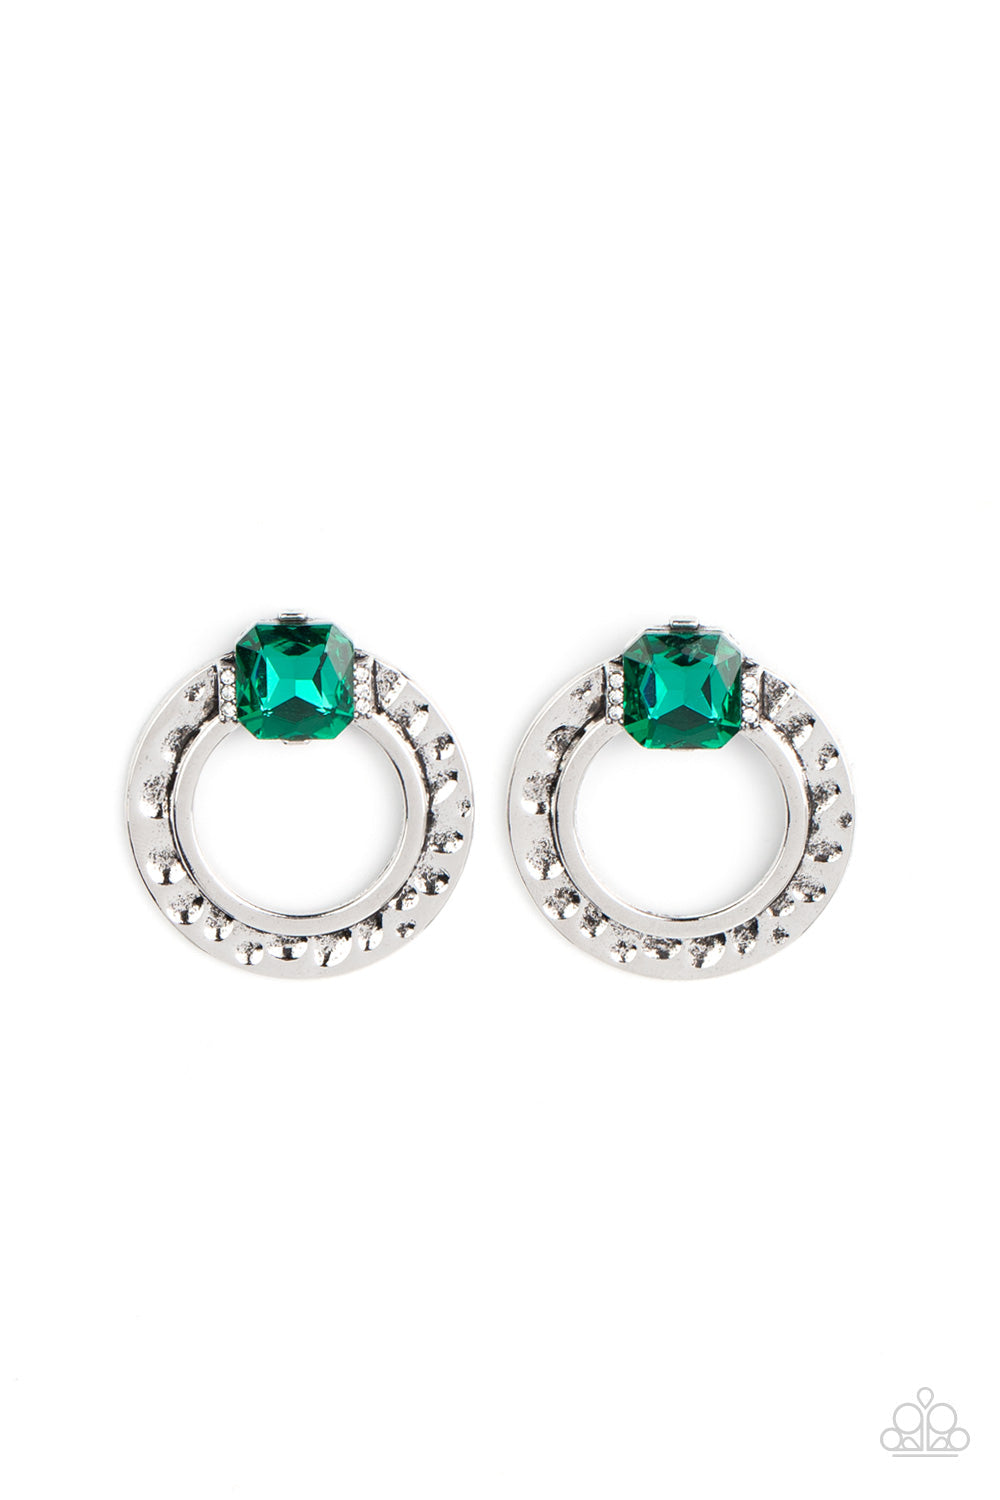 Smoldering Scintillation - Green and Silver Earrings - Paparazzi Accessories - Featuring a radiant cut, a green rhinestone sparkles between two dainty rows of glassy white rhinestones atop a hammered silver ring for a gritty yet glamorous finish. Earring attaches to a standard post fitting. Bejeweled Accessories By Kristie - Trendy fashion jewelry for everyone -